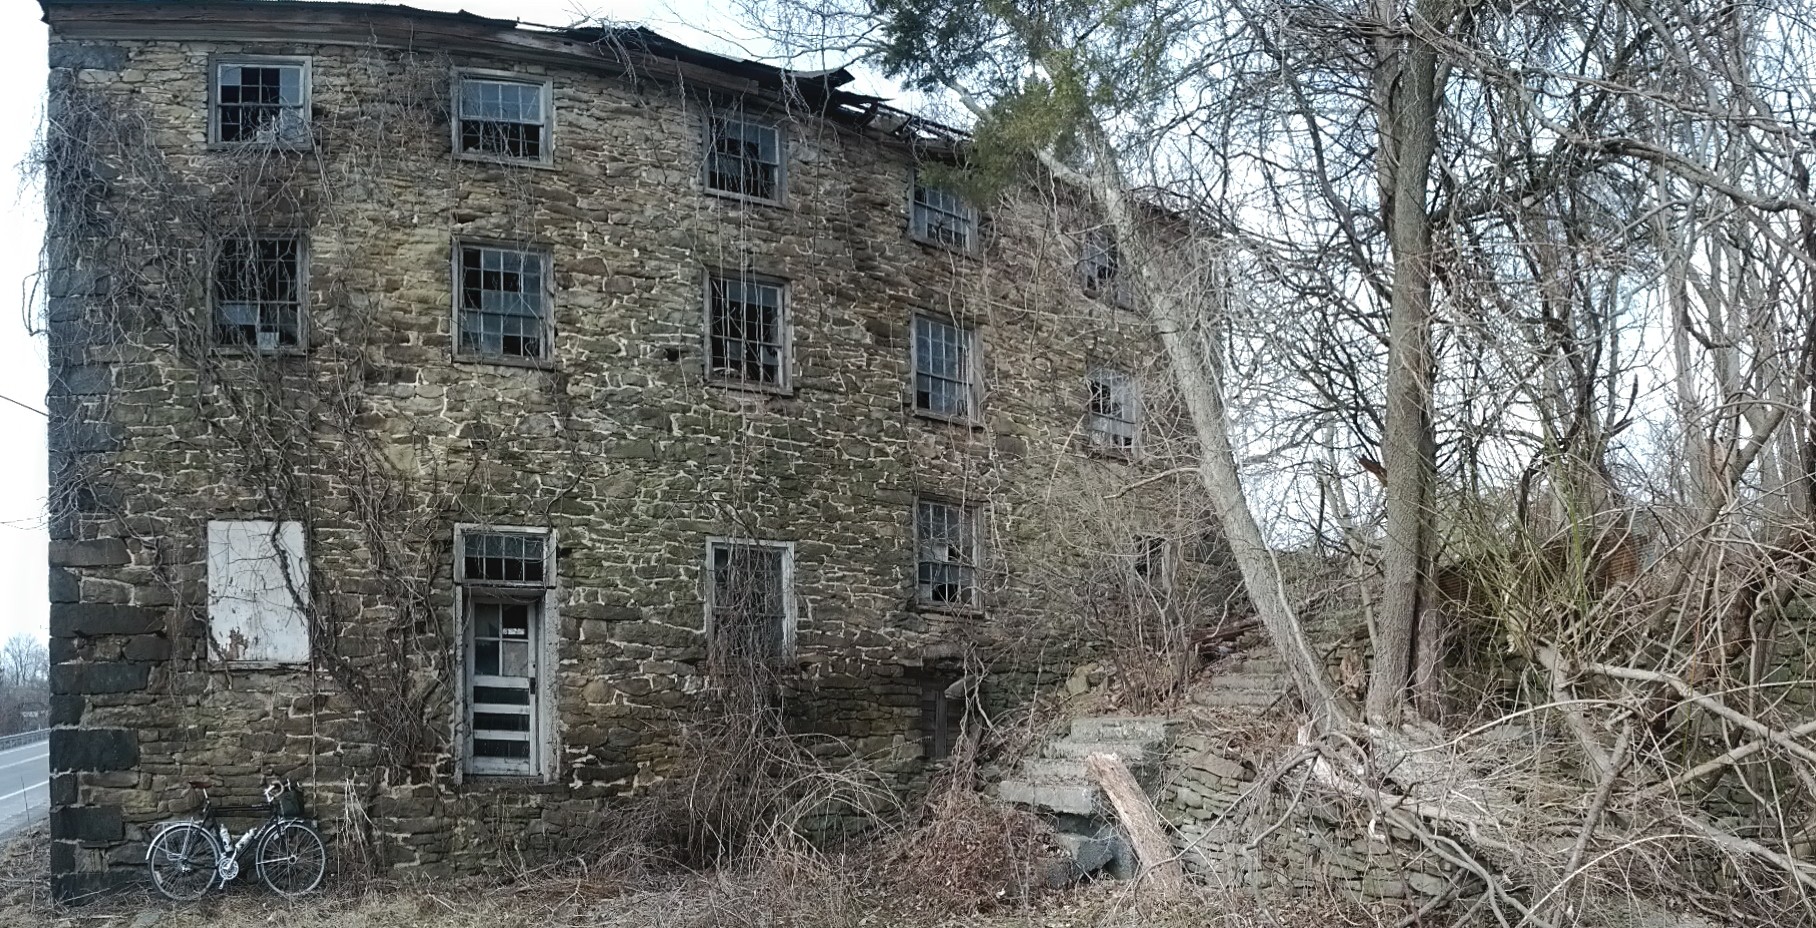 Spooky old mill. in ruins